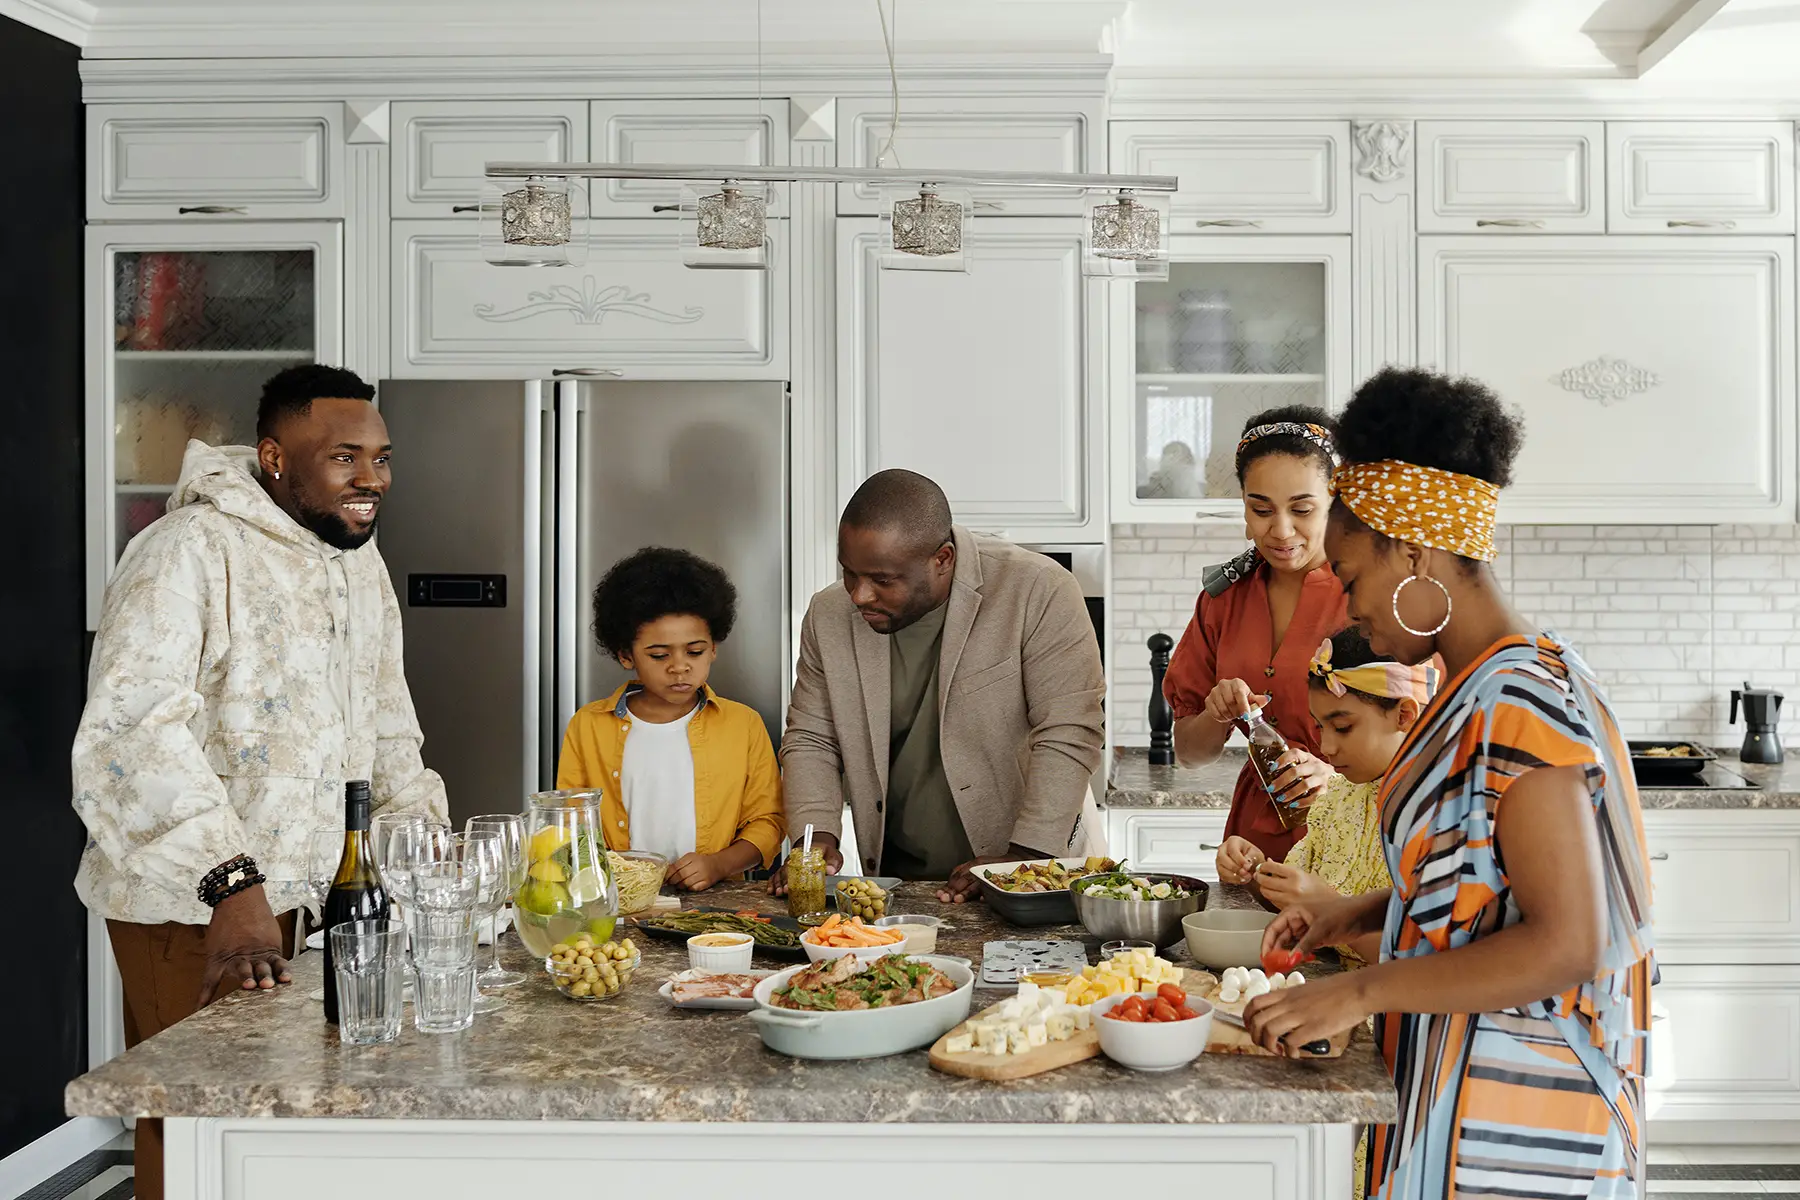 A family gathers around a kitchen island sharing food